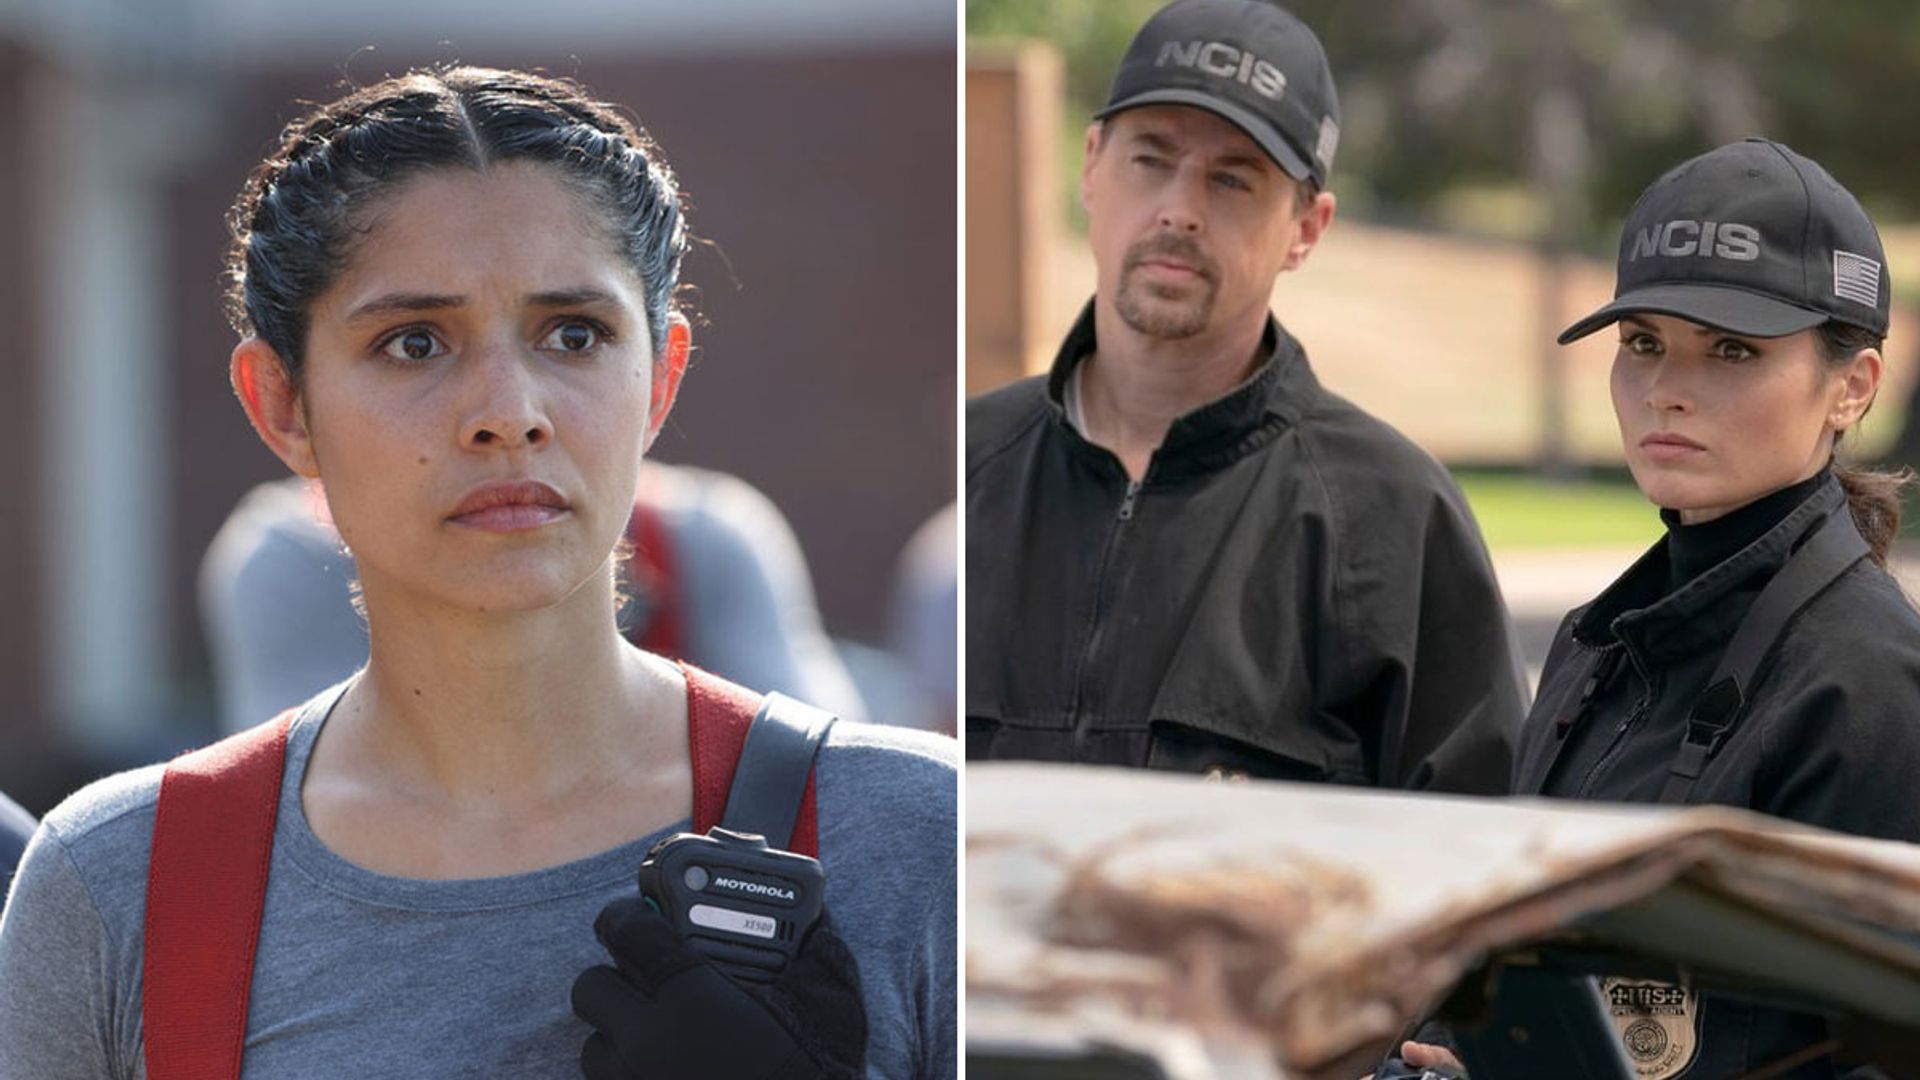 NCIS, Chicago Fire, Grey's Anatomy and more suffer major setback - get the details